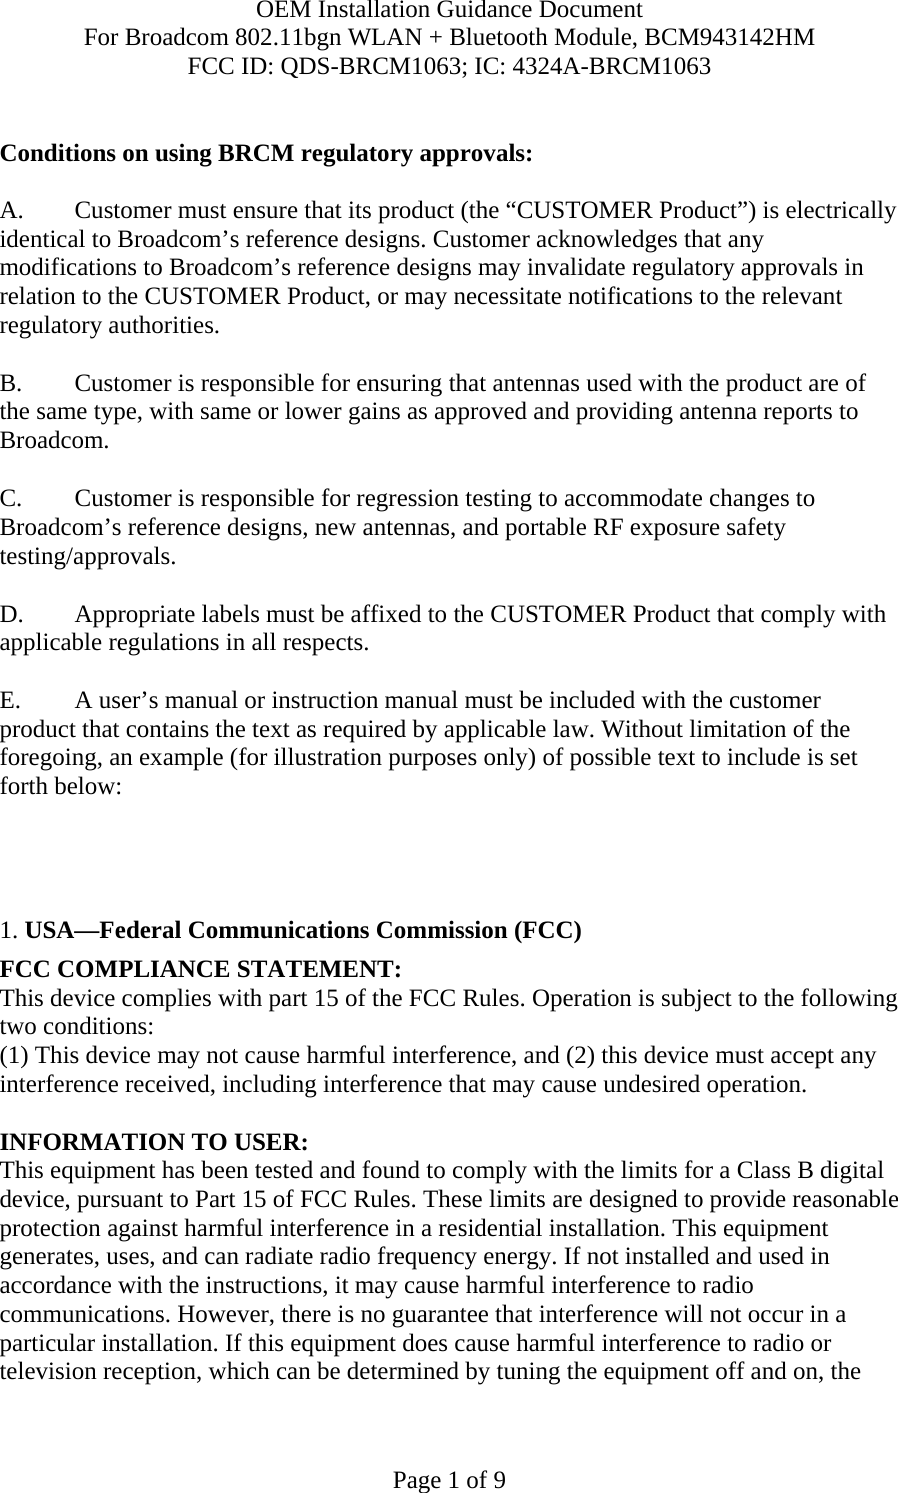 OEM Installation Guidance Document For Broadcom 802.11bgn WLAN + Bluetooth Module, BCM943142HM FCC ID: QDS-BRCM1063; IC: 4324A-BRCM1063  Page 1 of 9  Conditions on using BRCM regulatory approvals:   A.  Customer must ensure that its product (the “CUSTOMER Product”) is electrically identical to Broadcom’s reference designs. Customer acknowledges that any modifications to Broadcom’s reference designs may invalidate regulatory approvals in relation to the CUSTOMER Product, or may necessitate notifications to the relevant regulatory authorities.  B.   Customer is responsible for ensuring that antennas used with the product are of the same type, with same or lower gains as approved and providing antenna reports to Broadcom.  C.   Customer is responsible for regression testing to accommodate changes to Broadcom’s reference designs, new antennas, and portable RF exposure safety testing/approvals.  D.  Appropriate labels must be affixed to the CUSTOMER Product that comply with applicable regulations in all respects.    E.  A user’s manual or instruction manual must be included with the customer product that contains the text as required by applicable law. Without limitation of the foregoing, an example (for illustration purposes only) of possible text to include is set forth below:       1. USA—Federal Communications Commission (FCC) FCC COMPLIANCE STATEMENT: This device complies with part 15 of the FCC Rules. Operation is subject to the following two conditions: (1) This device may not cause harmful interference, and (2) this device must accept any interference received, including interference that may cause undesired operation.  INFORMATION TO USER: This equipment has been tested and found to comply with the limits for a Class B digital device, pursuant to Part 15 of FCC Rules. These limits are designed to provide reasonable protection against harmful interference in a residential installation. This equipment generates, uses, and can radiate radio frequency energy. If not installed and used in accordance with the instructions, it may cause harmful interference to radio communications. However, there is no guarantee that interference will not occur in a particular installation. If this equipment does cause harmful interference to radio or television reception, which can be determined by tuning the equipment off and on, the 